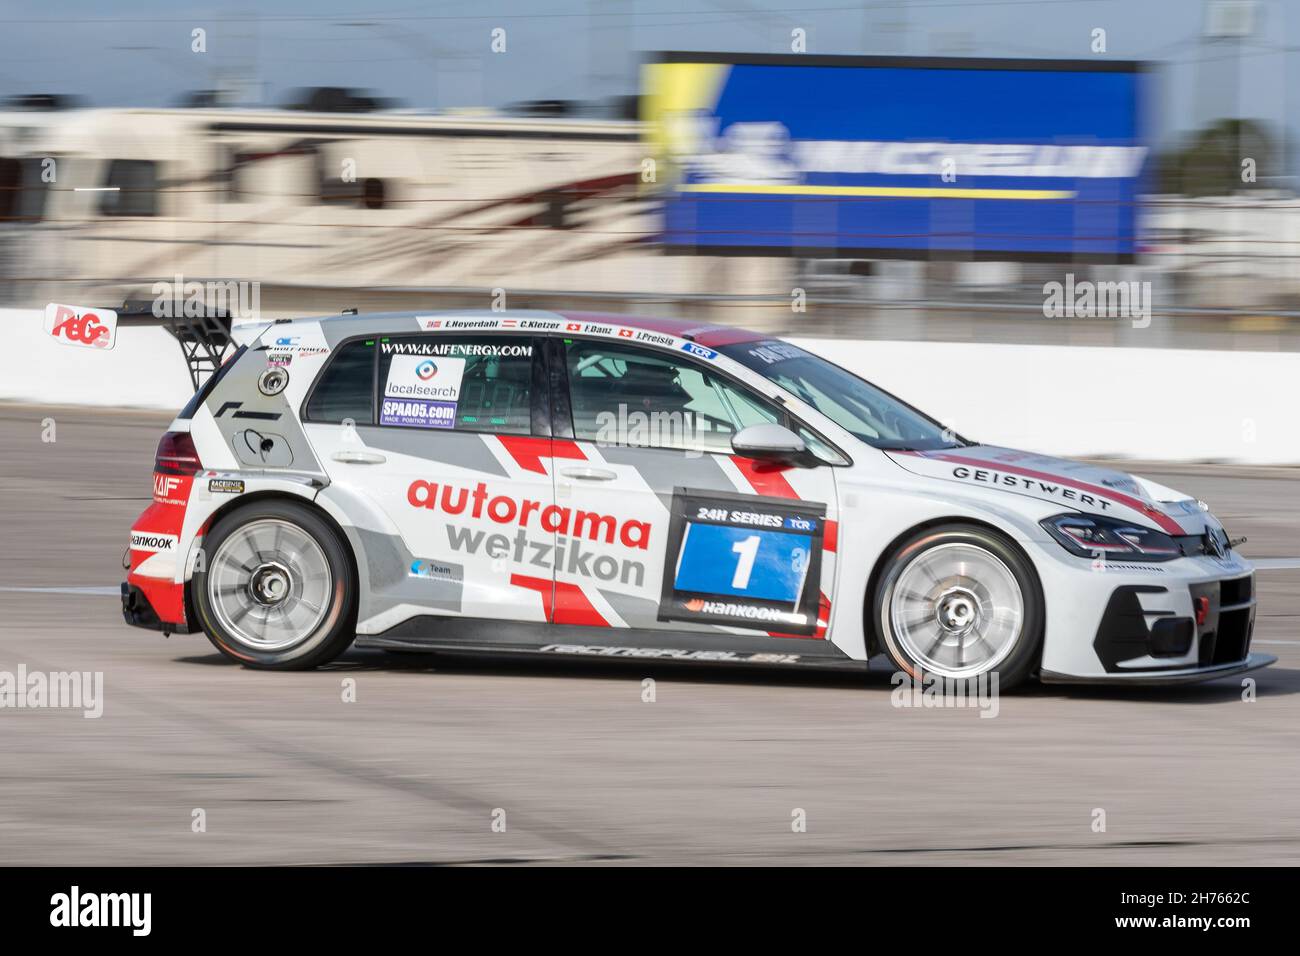 Sebring, USA. 19th Nov, 2021. 1 Autorama Motorsportby Wolf-Power Racing Volkswagen Golf GTi TCR DSG:Constantin Kletzer, Emil Heyerdahl, Fabian Danz, Jasmin Preisig during the 24H Series powered by Hankook. Schedule includes USA stops on November 19-21, 2021. Racing cars from the many countries, such as: Germany, USA, France, Nederland, Romania, Denmark, Canada, Spain, Great Britain, Italy; in many different classes: GT4, 991, GTX, GT3, TCR, TCX, P4. (Photo by Yaroslav Sabitov/YES Market Media/Sipa USA) Credit: Sipa USA/Alamy Live News Stock Photo